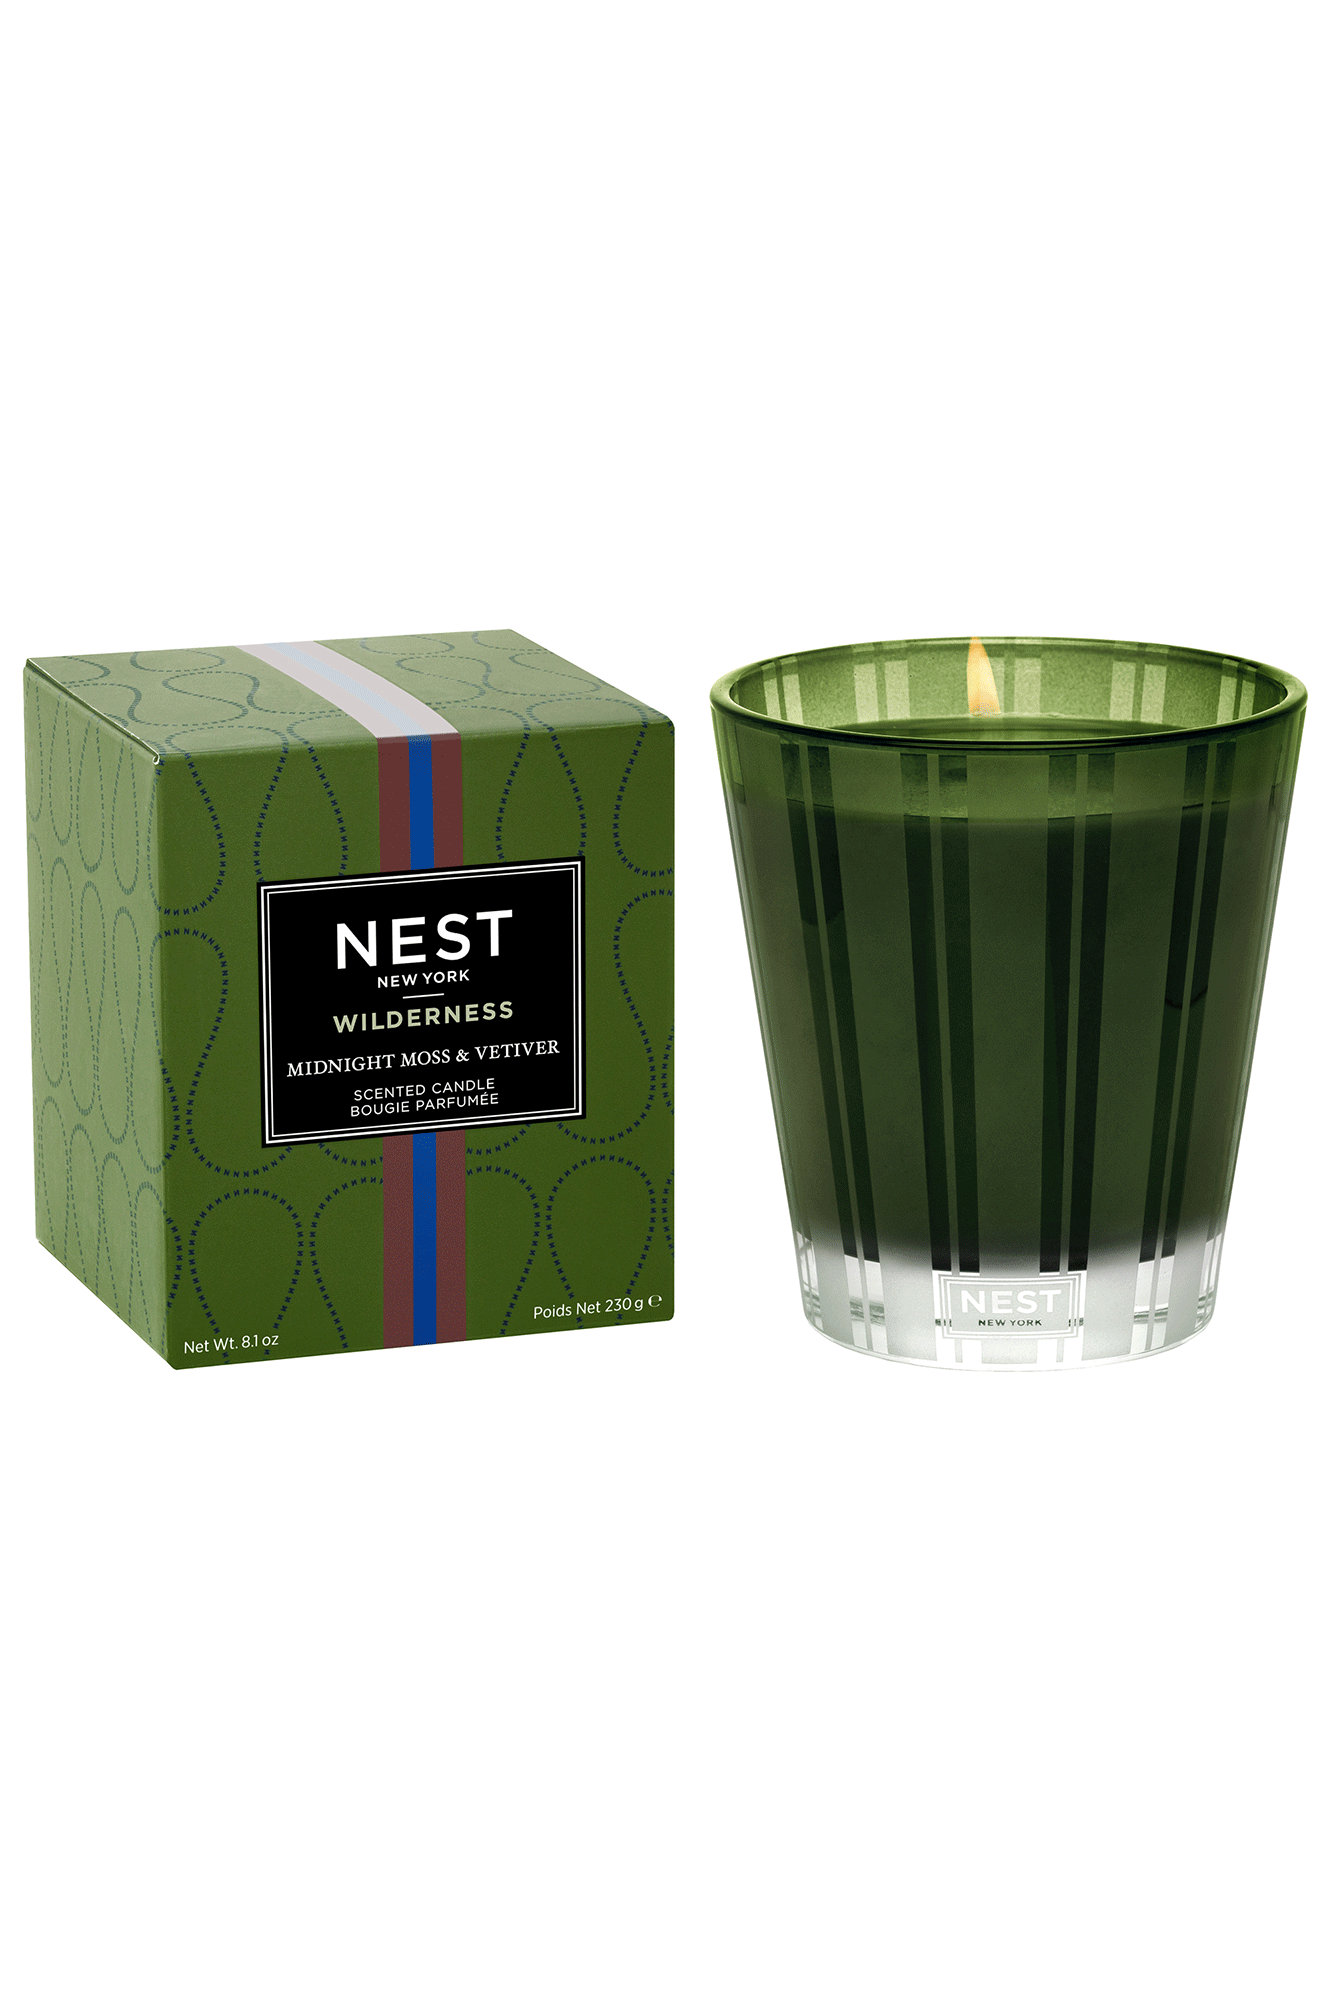 Brighten up your home with the Midnight Moss & Vetiver Classic Candle from Nest. Featuring a proprietary premium wax blend, this exquisitely scented candle provides a clean and even burn while subtly filling your space with a luxurious scent. Enjoy your favorite fragrance longer with this high-quality candle.